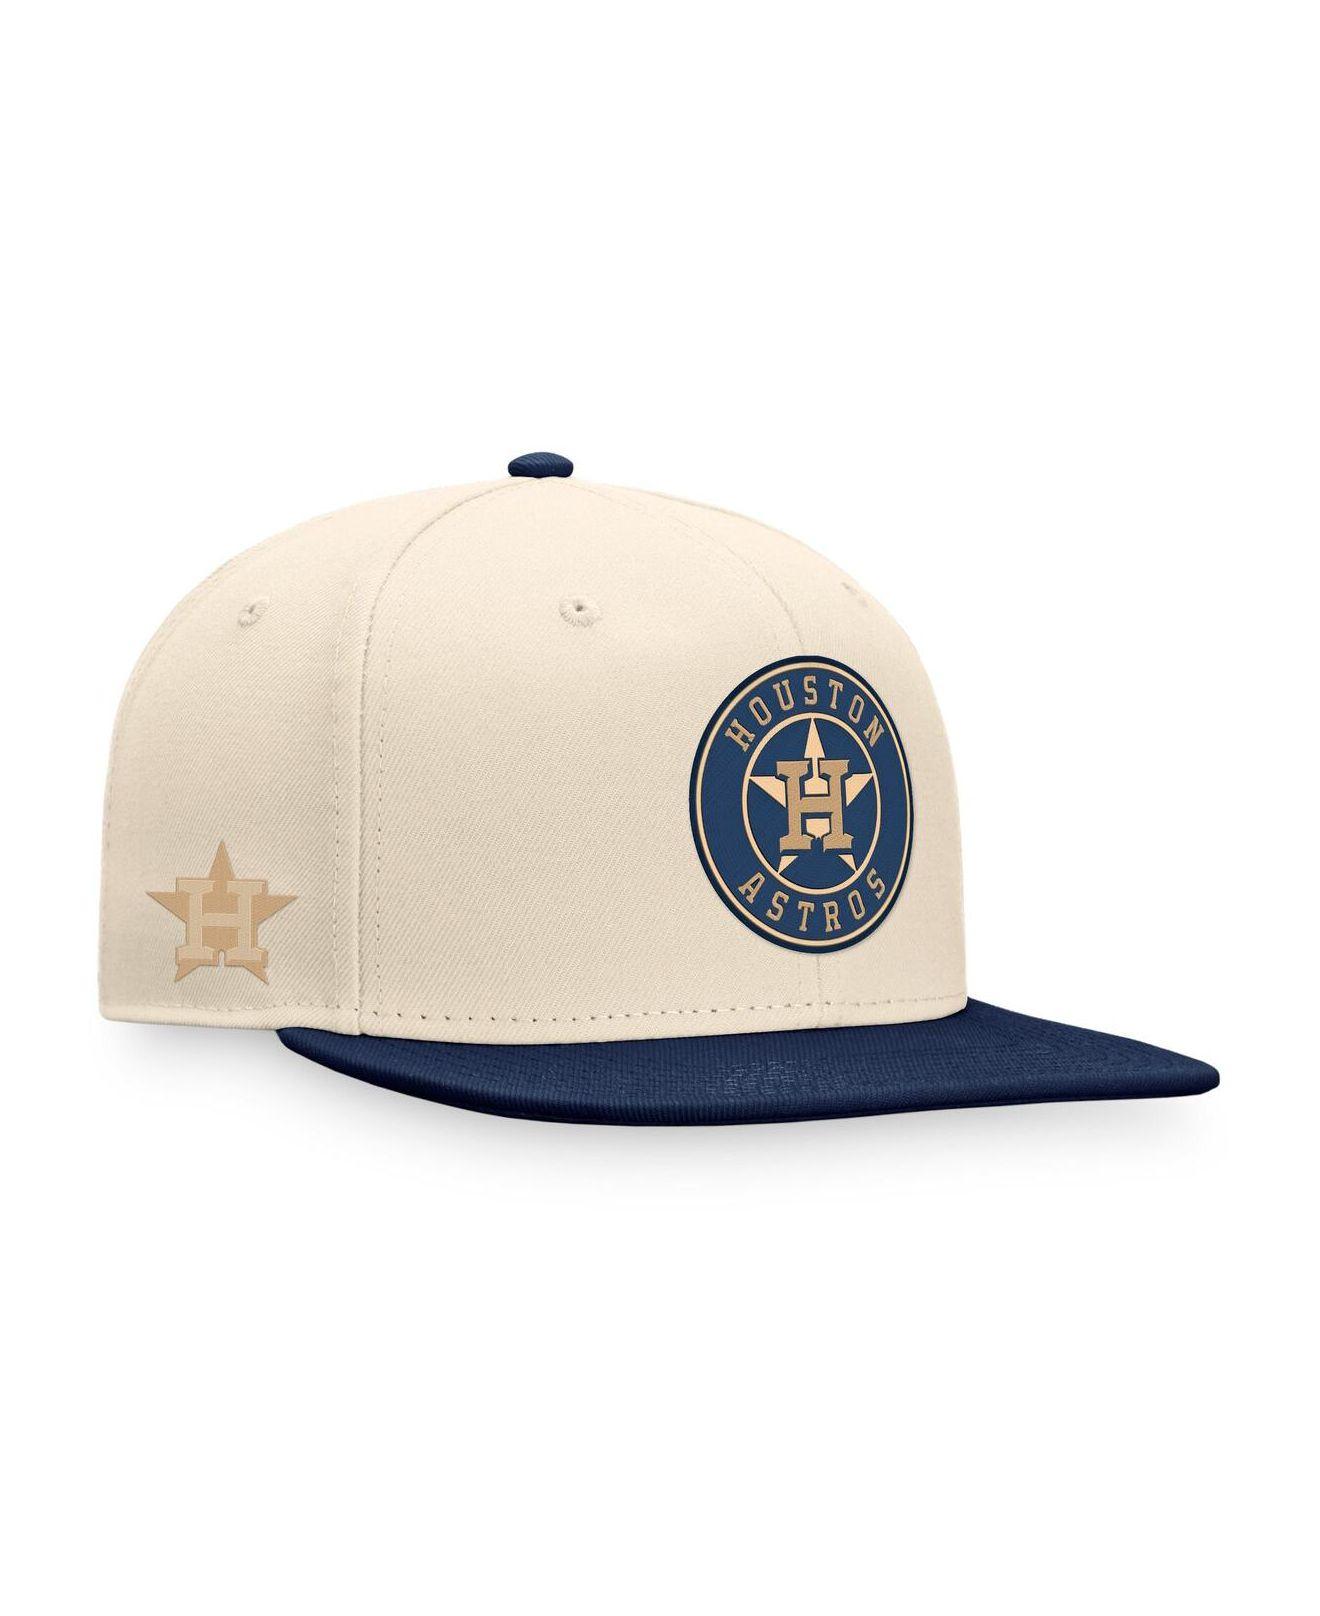 Womens Fanatics Branded Gold San Diego Padres Team India